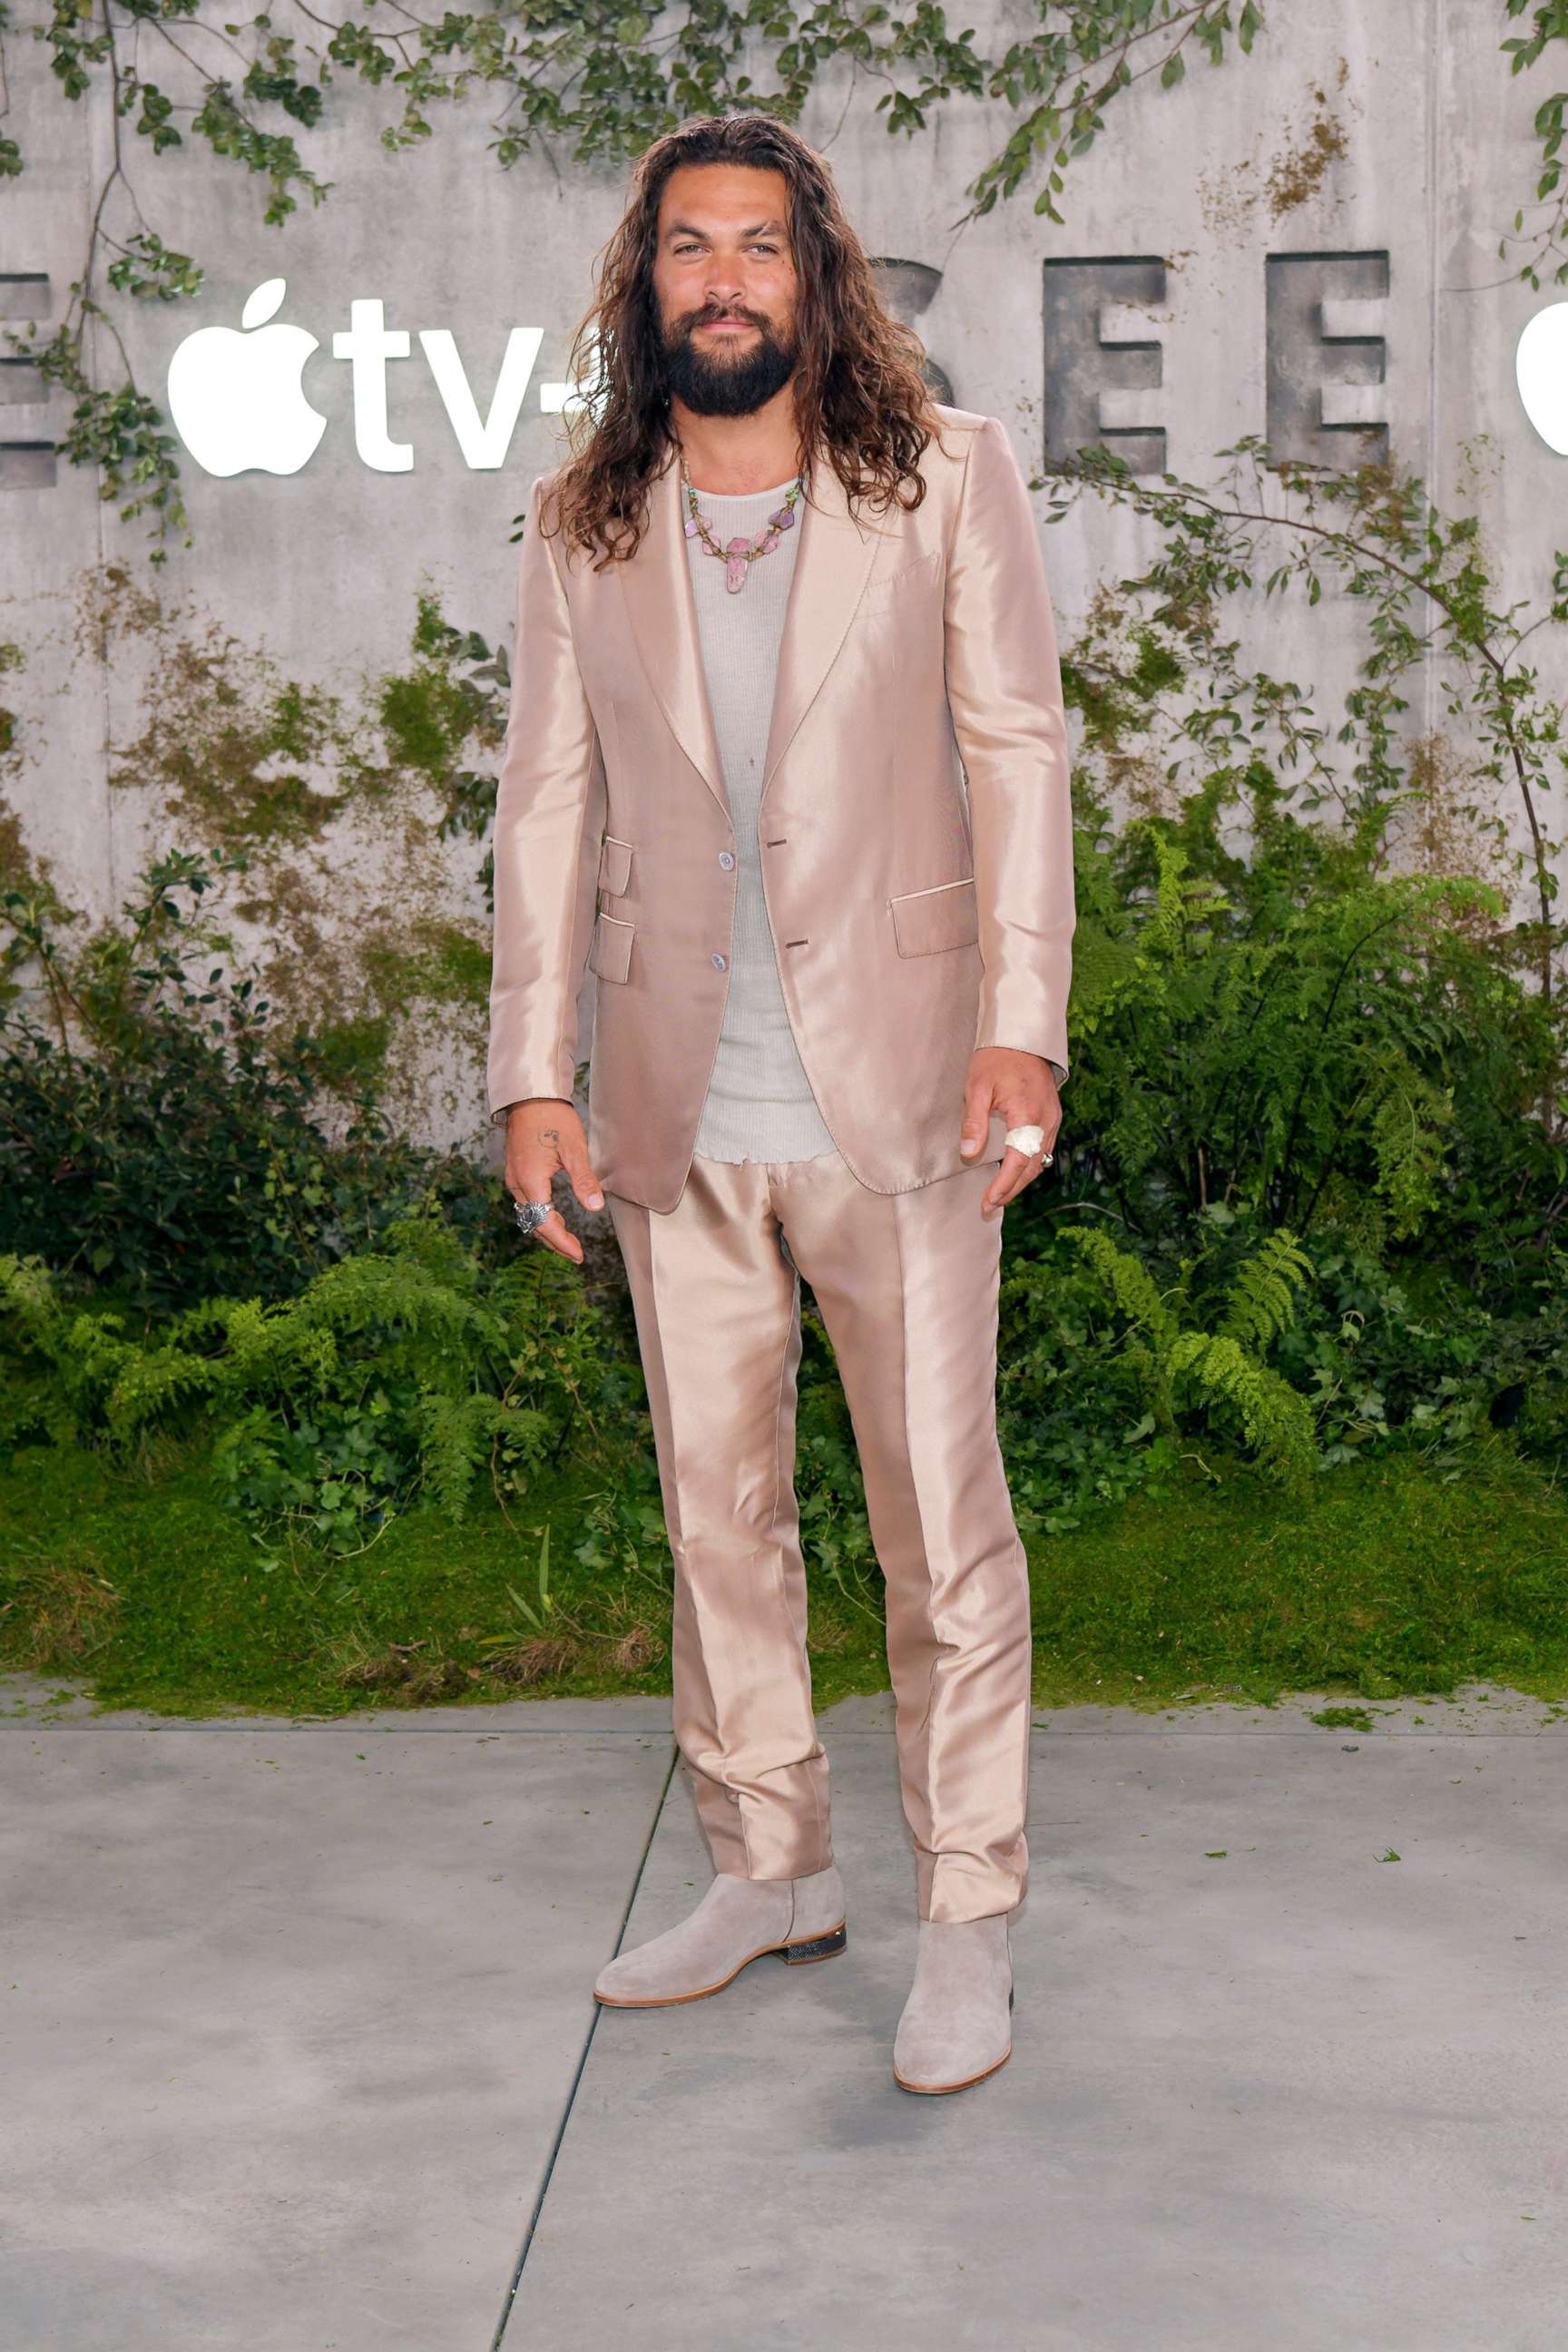 PHOTO: Jason Momoa attends the world premiere of Apple TV+'s "See" at Fox Village Theater on Oct. 21, 2019, in Los Angeles.